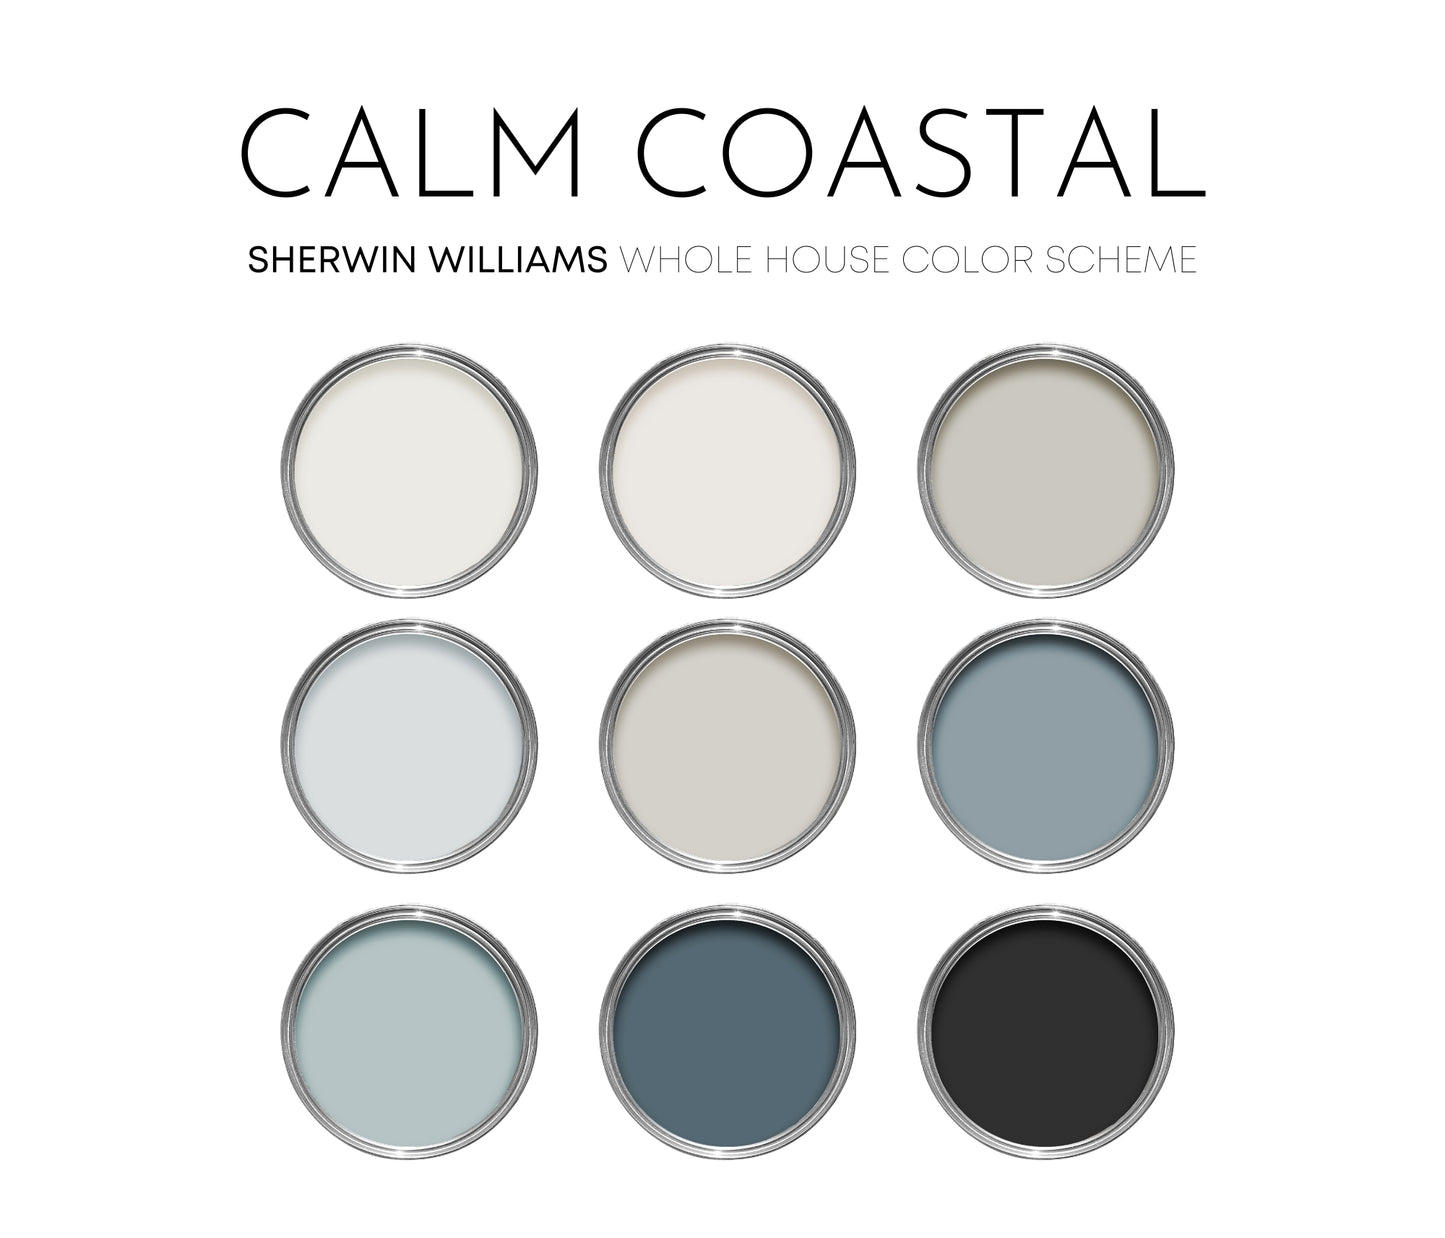 Calm Coastal Sherwin Williams Paint Palette - Modern Neutral Interior Paint Colors for Home, Coastal Interior Design Color Palette